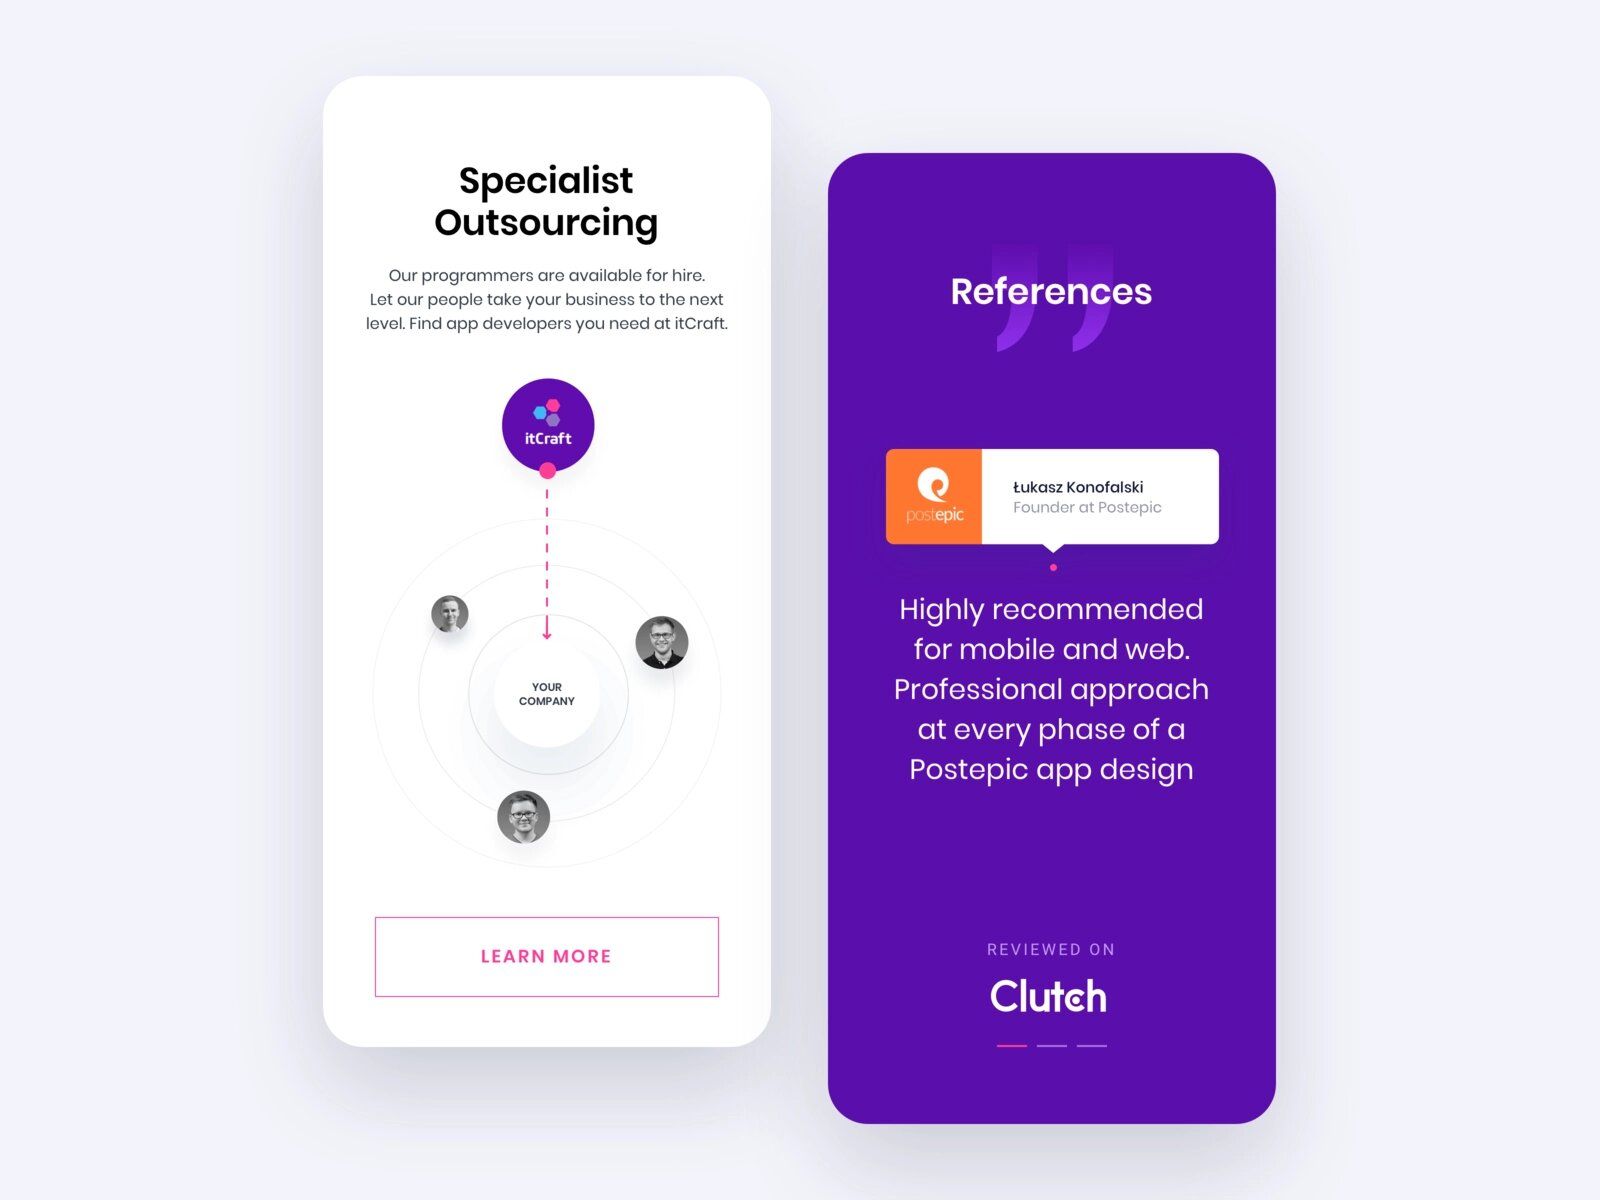 So you can successfully outsource mobile app development, we’ll give you some tips and insights (*image by [Jakub Dobek](https://dribbble.com/jakubdobek){ rel="nofollow" target="_blank" .default-md}*)